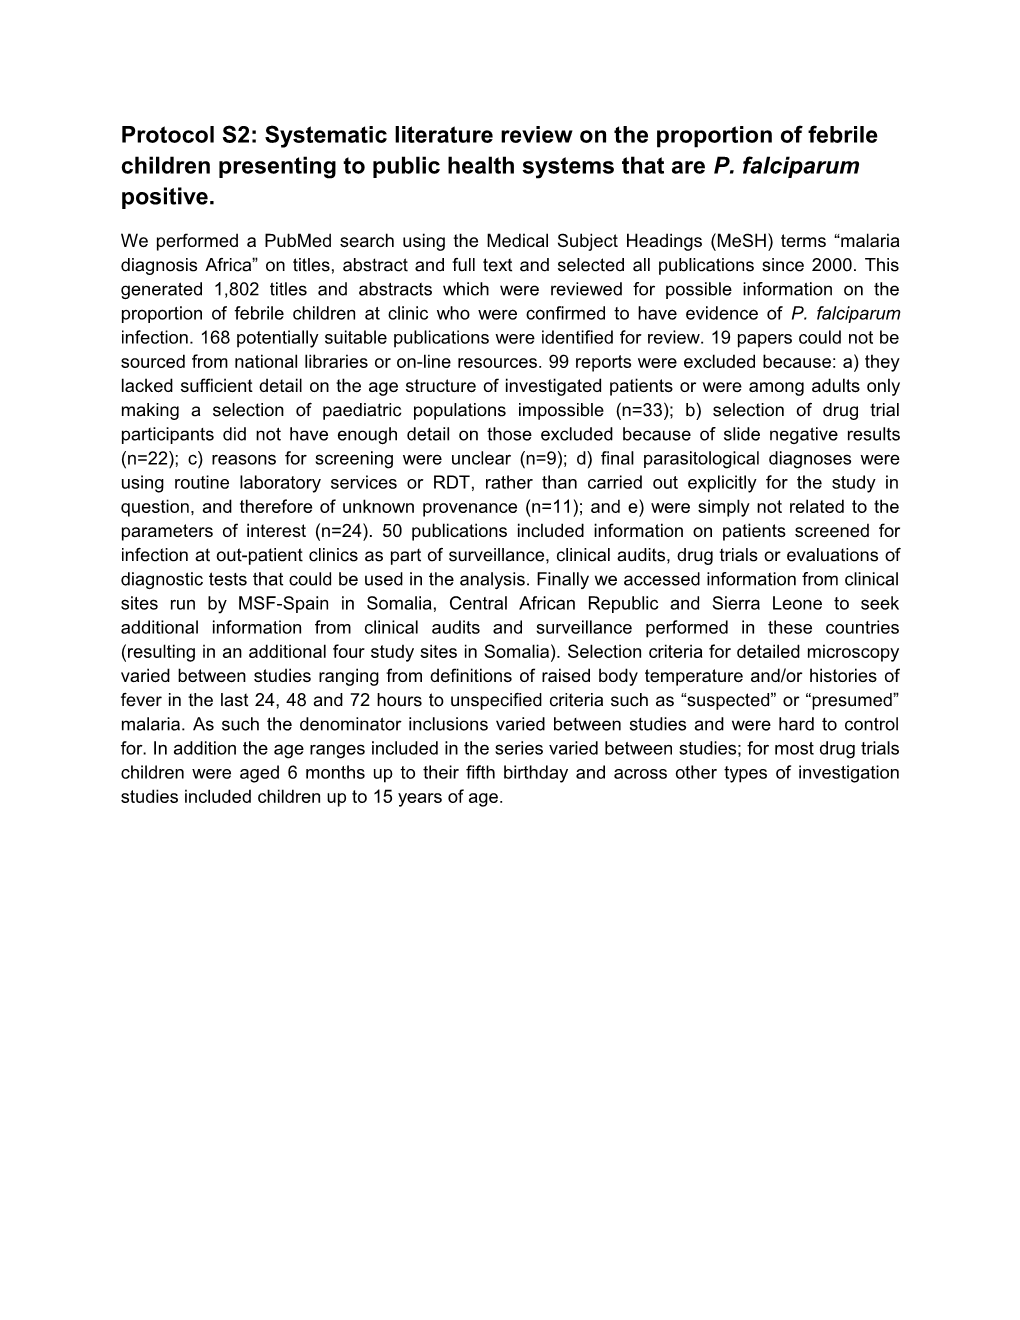 Protocol S2: Systematic Literature Review on the Proportion of Febrile Children Presenting